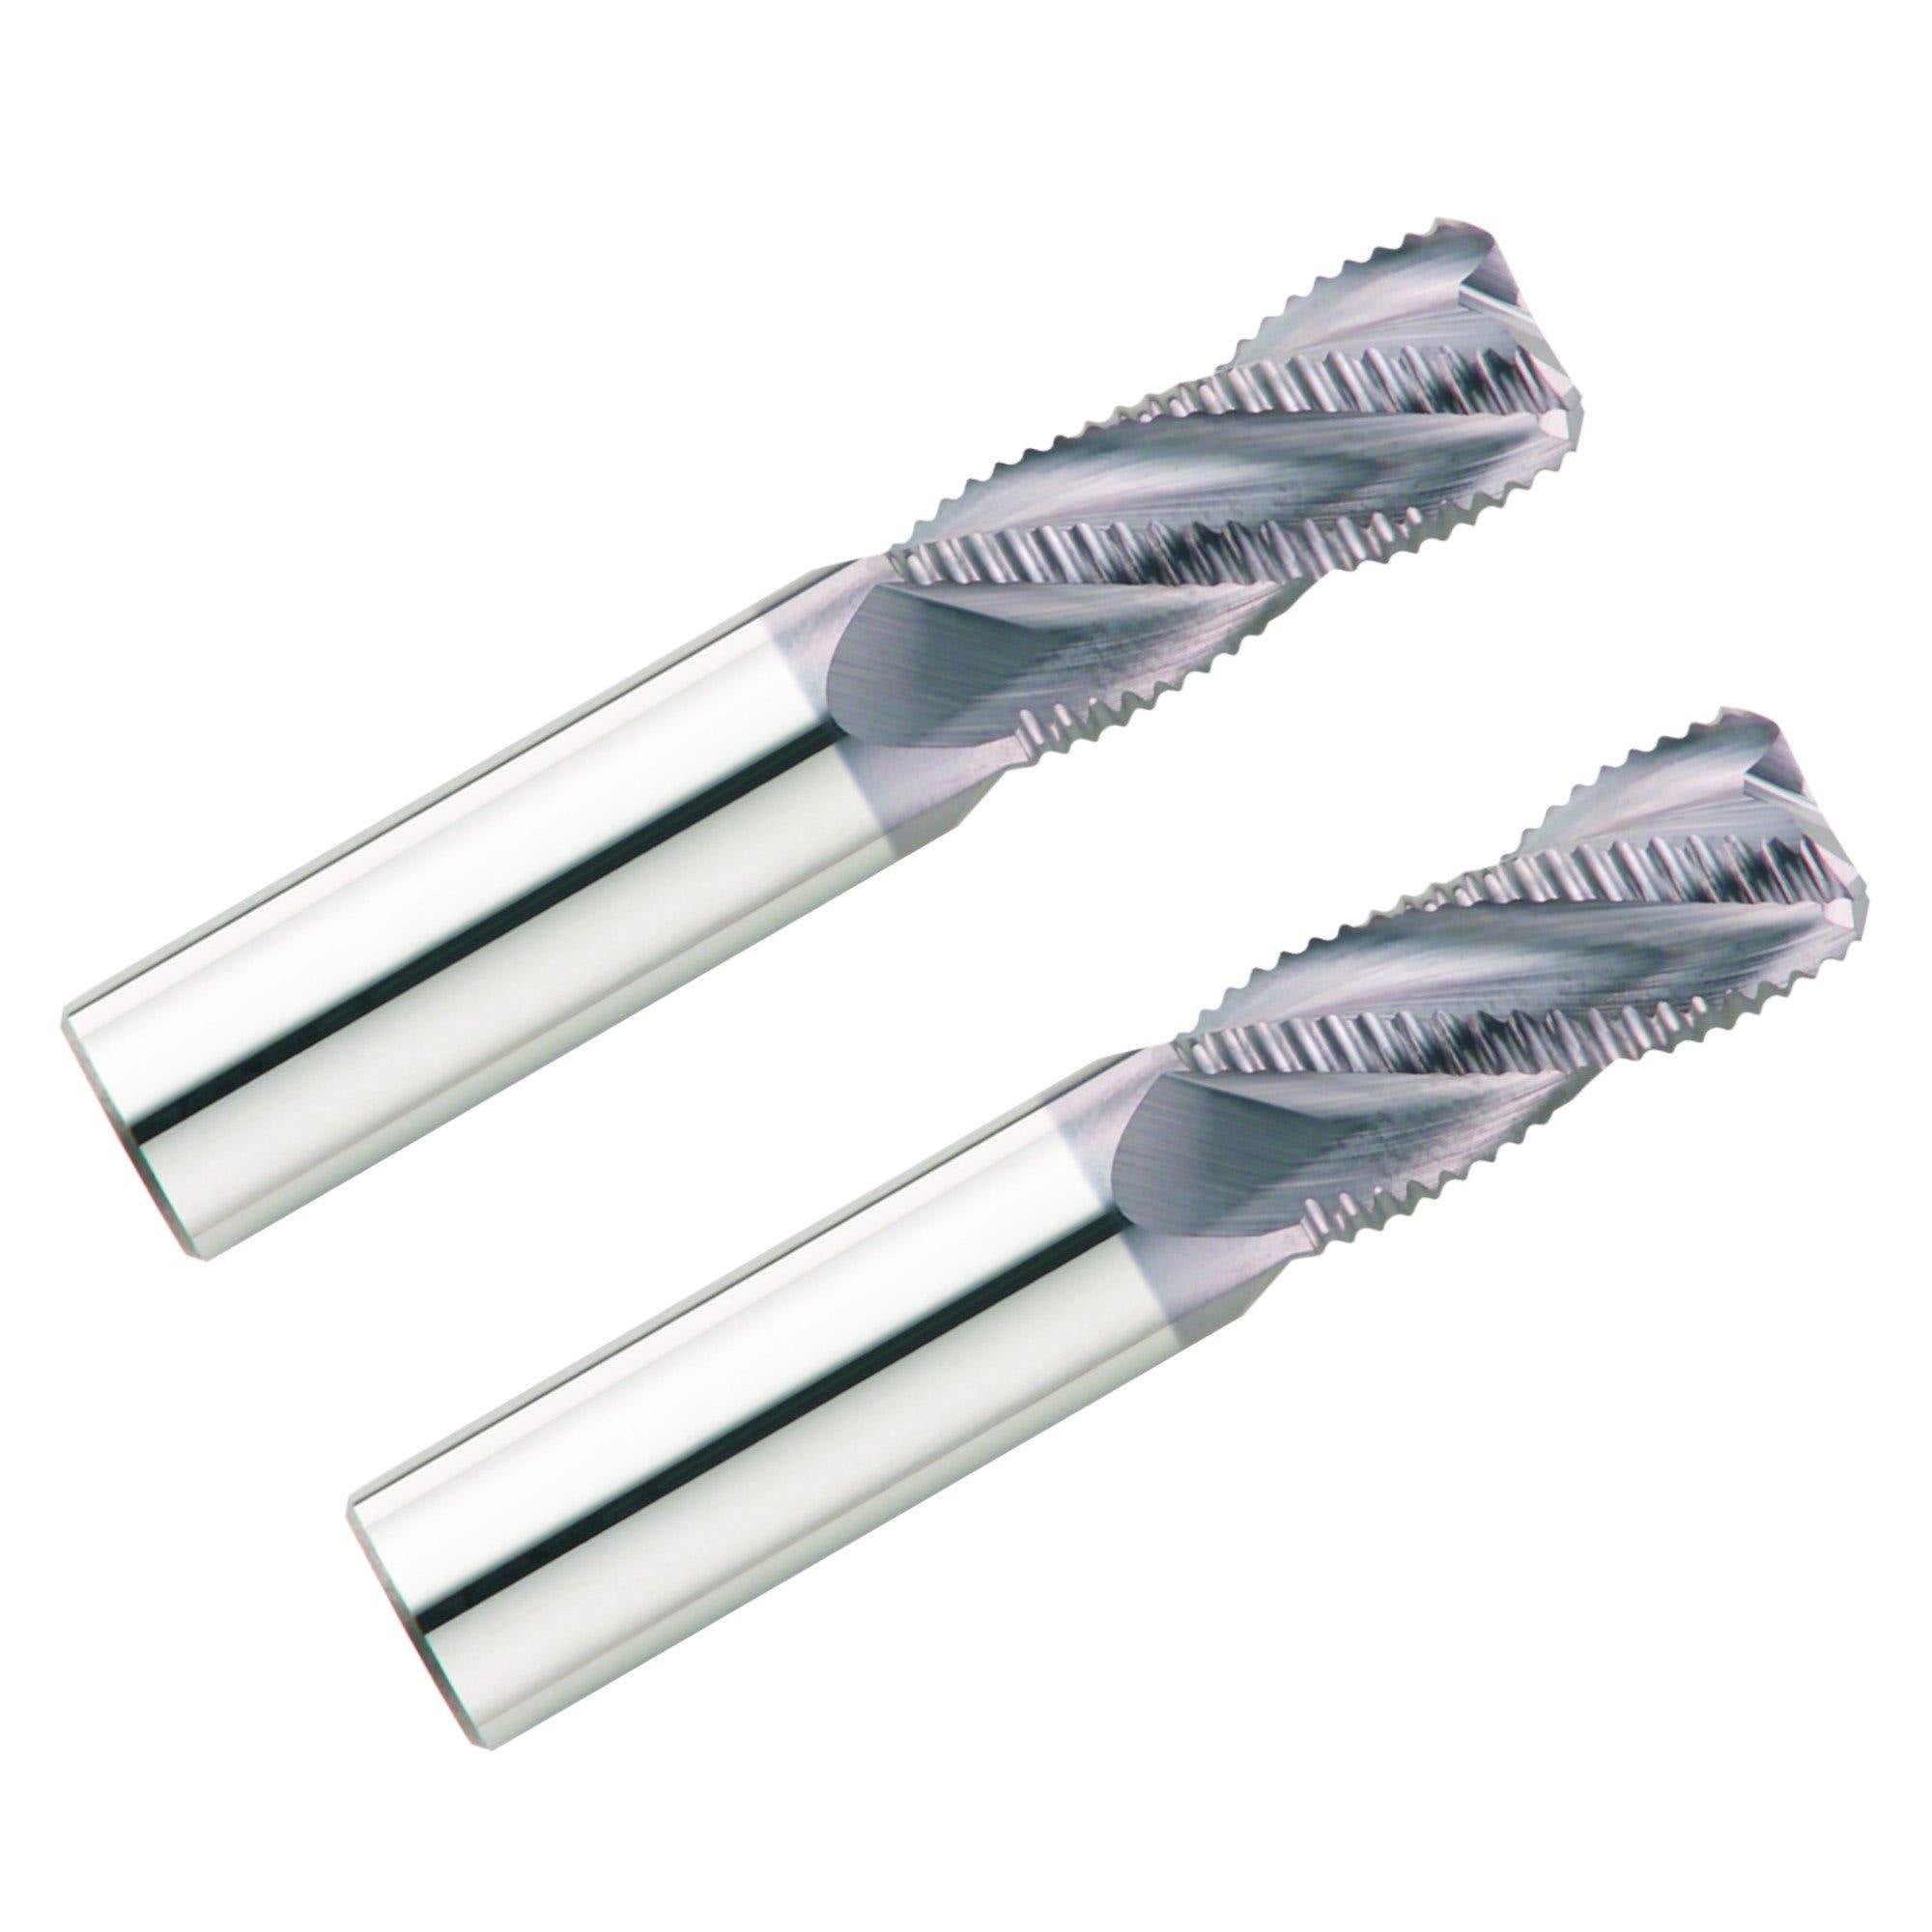 (2 Pack) 1-1/4" x 2" x 4-1/2" Turbo Roughing Carbide End Mills - The End Mill Store 